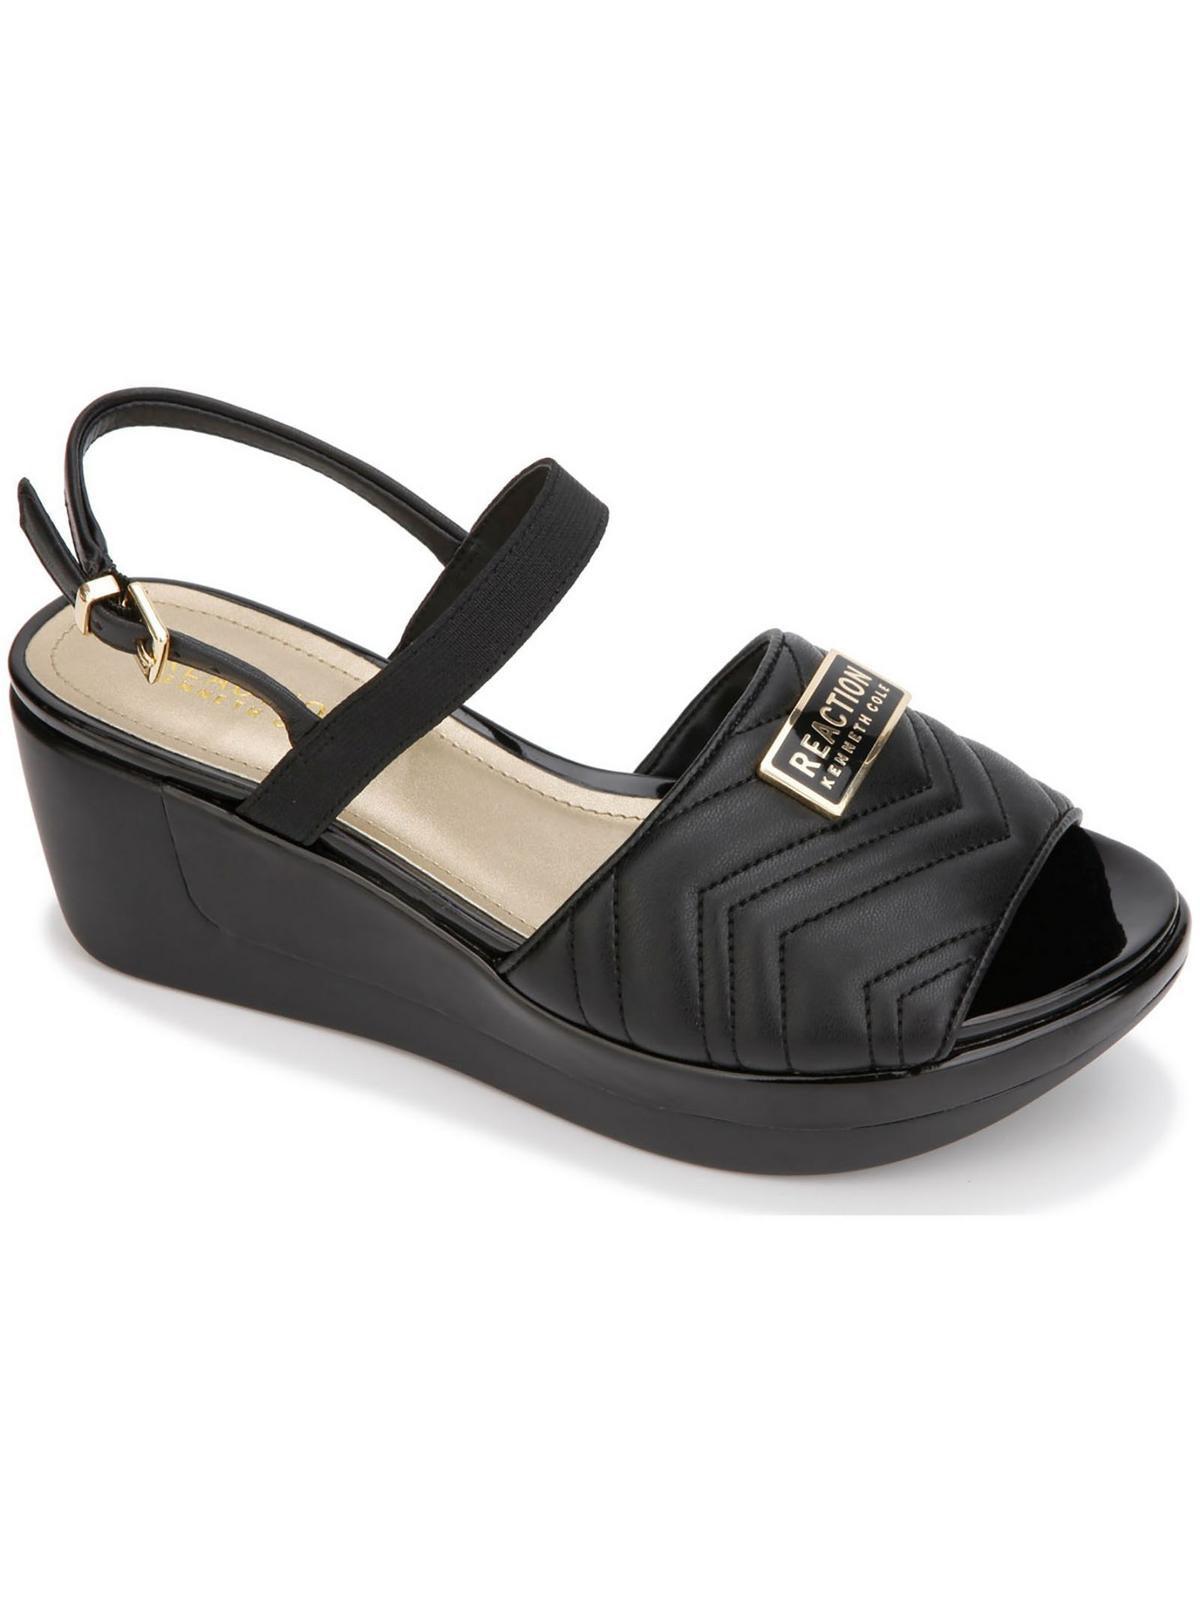 Kenneth Cole Reaction Pepea Two Piece Quilted Dressy Slip On Wedge Sandals  in Black | Lyst